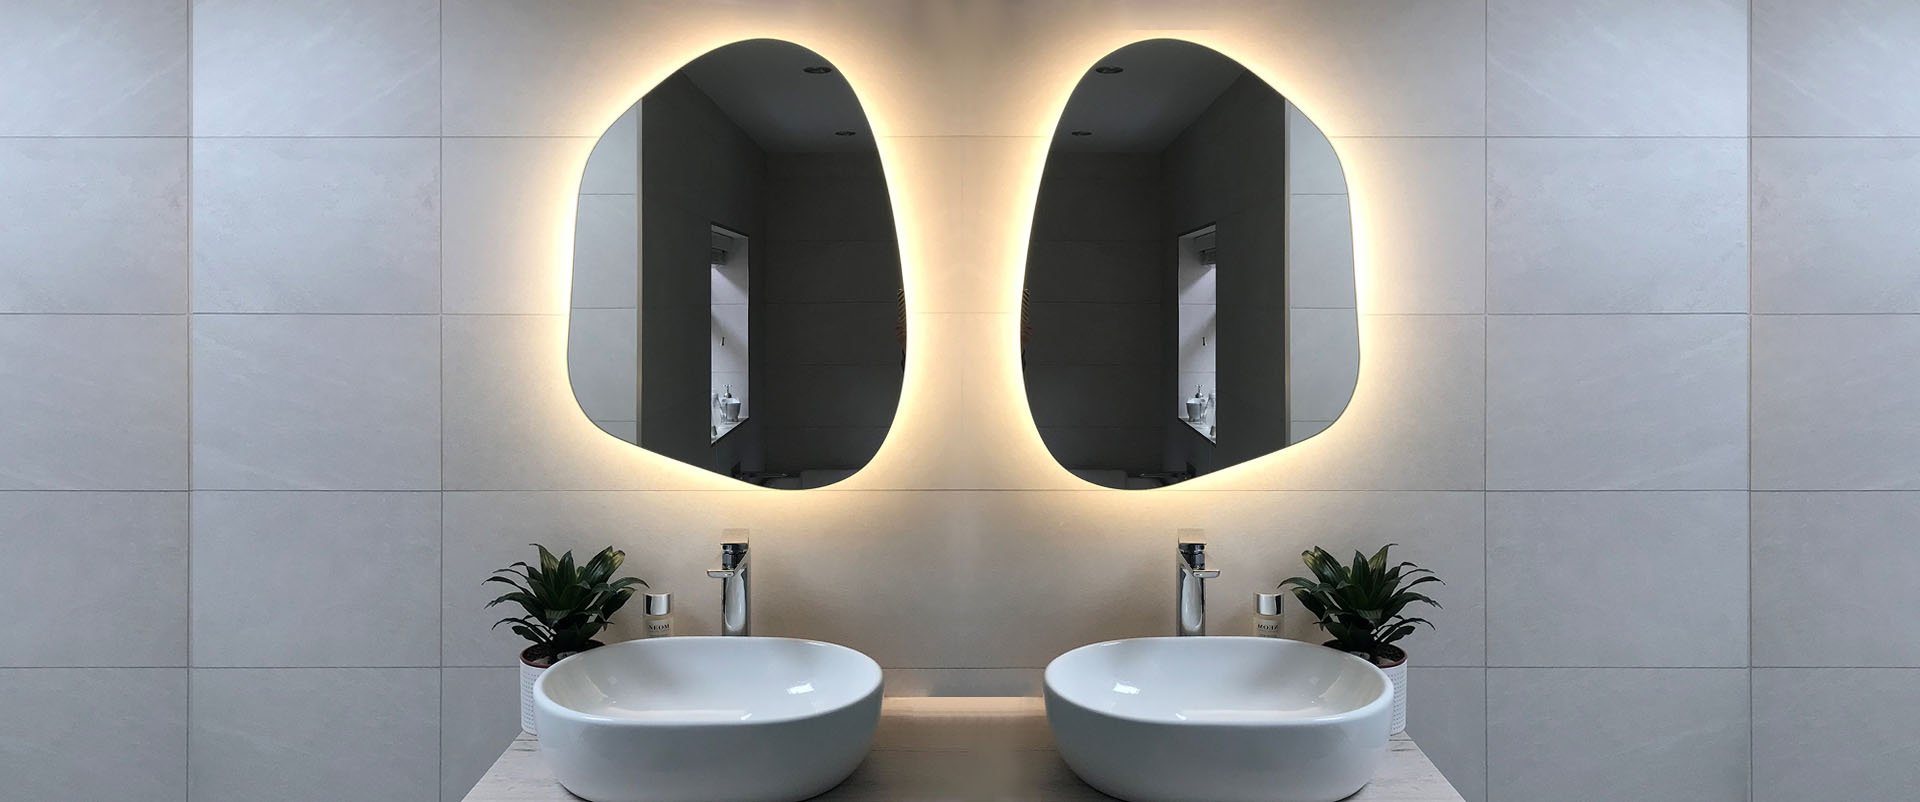 Asymmetrical Pebble Mirrors with Shaver Socket